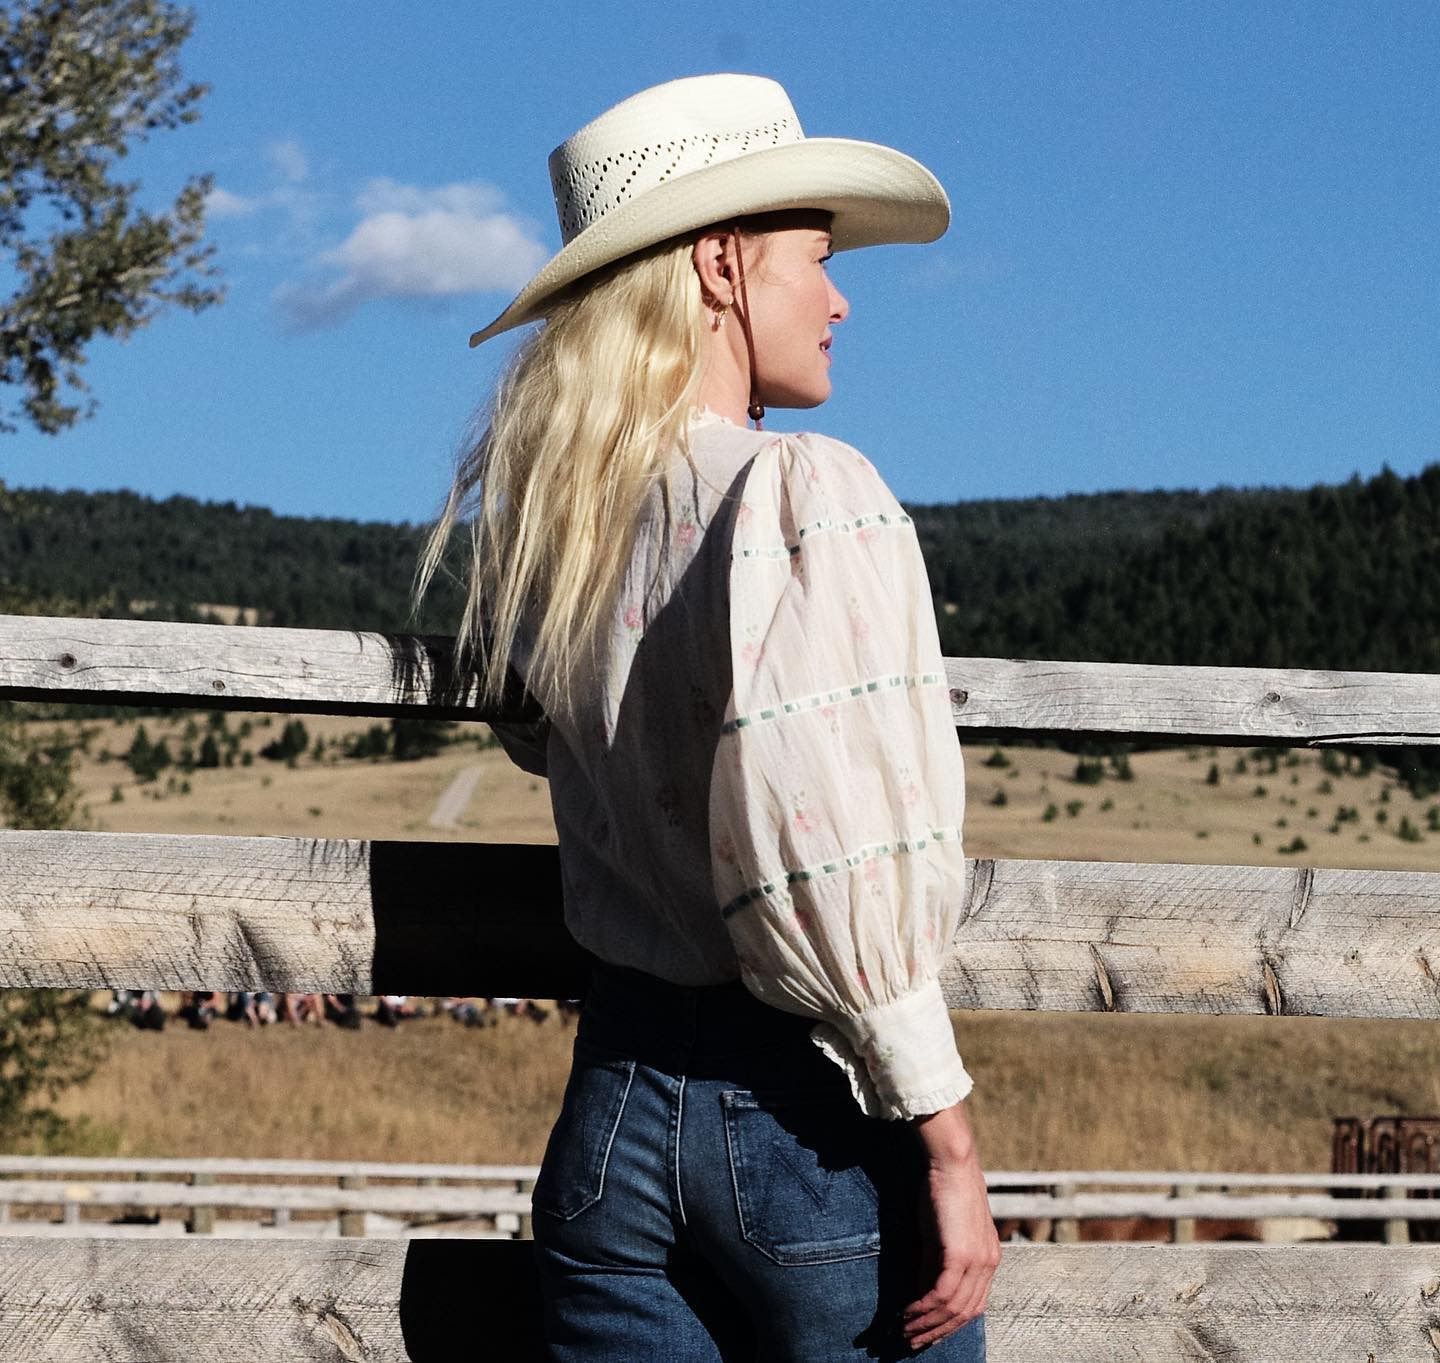 PHOTOS Kate Bosworth La Country Girl!